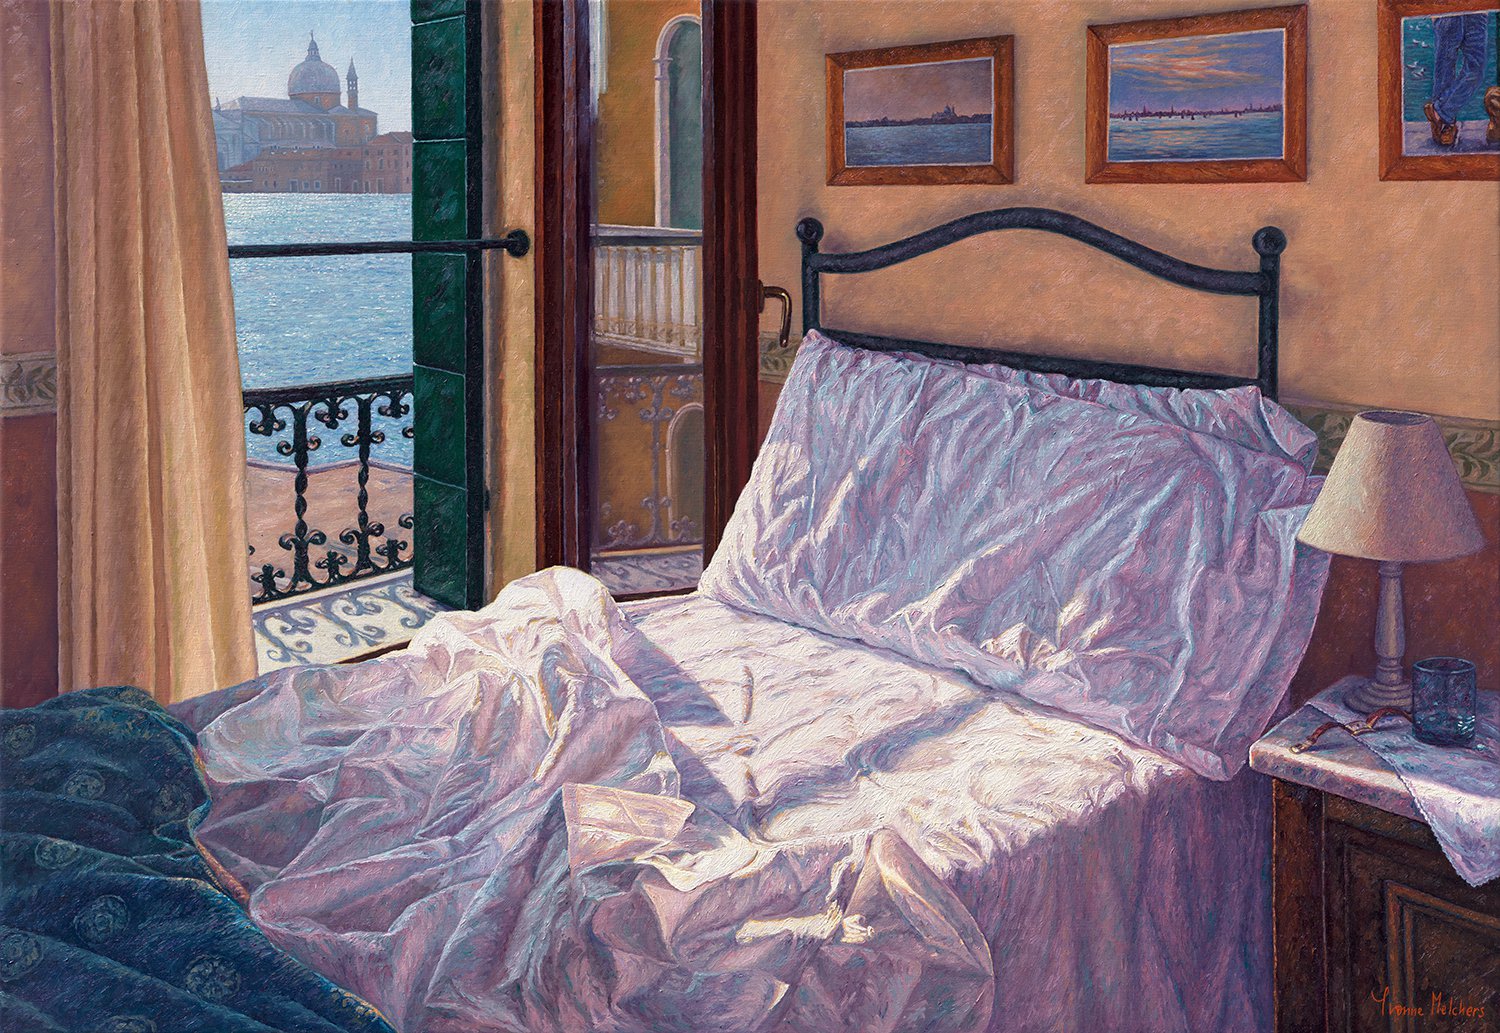 Room with a View/Autumn in Venice - Yvonne Melchers